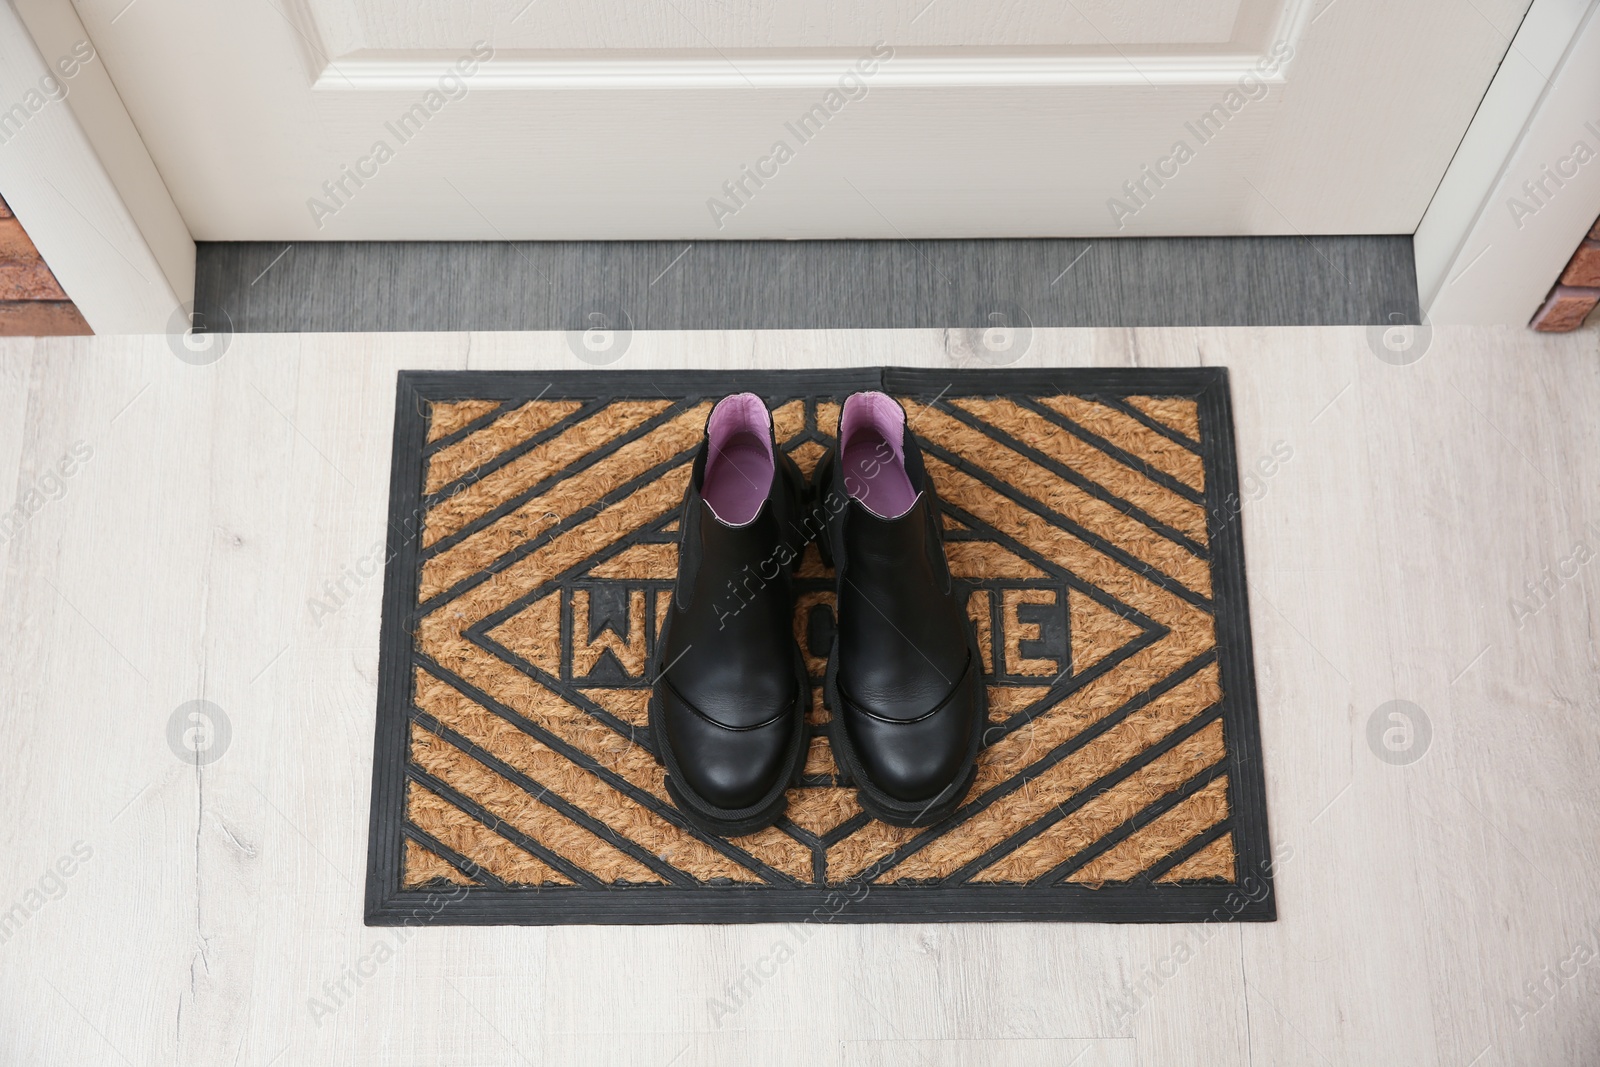 Photo of Stylish shoes on door mat in hall, above view